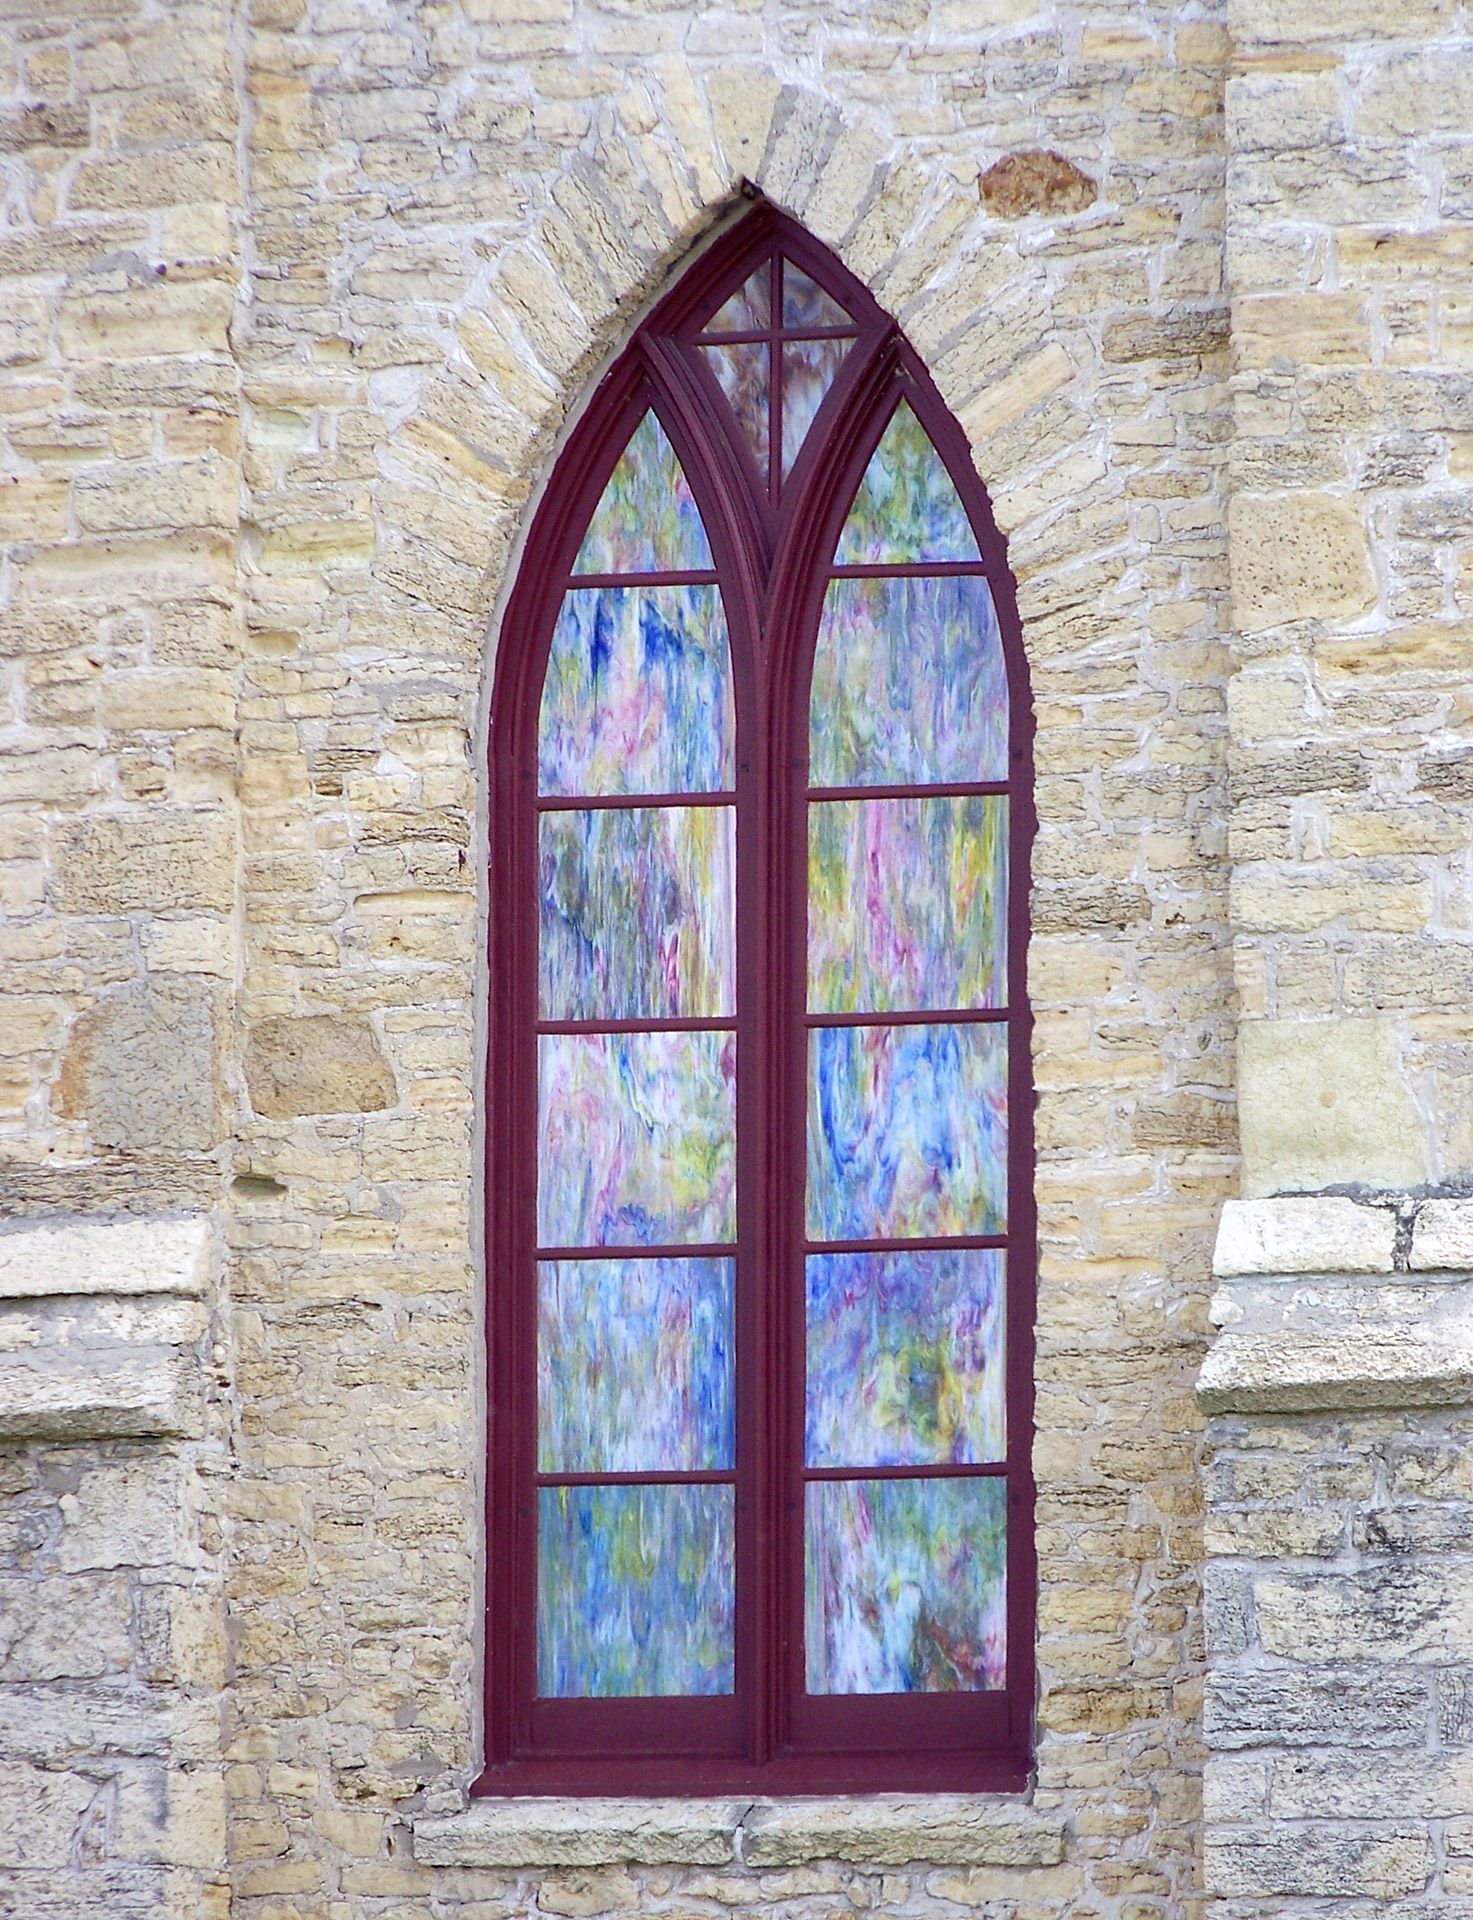 A stained glass window displays pastel colors in a stone church facade.